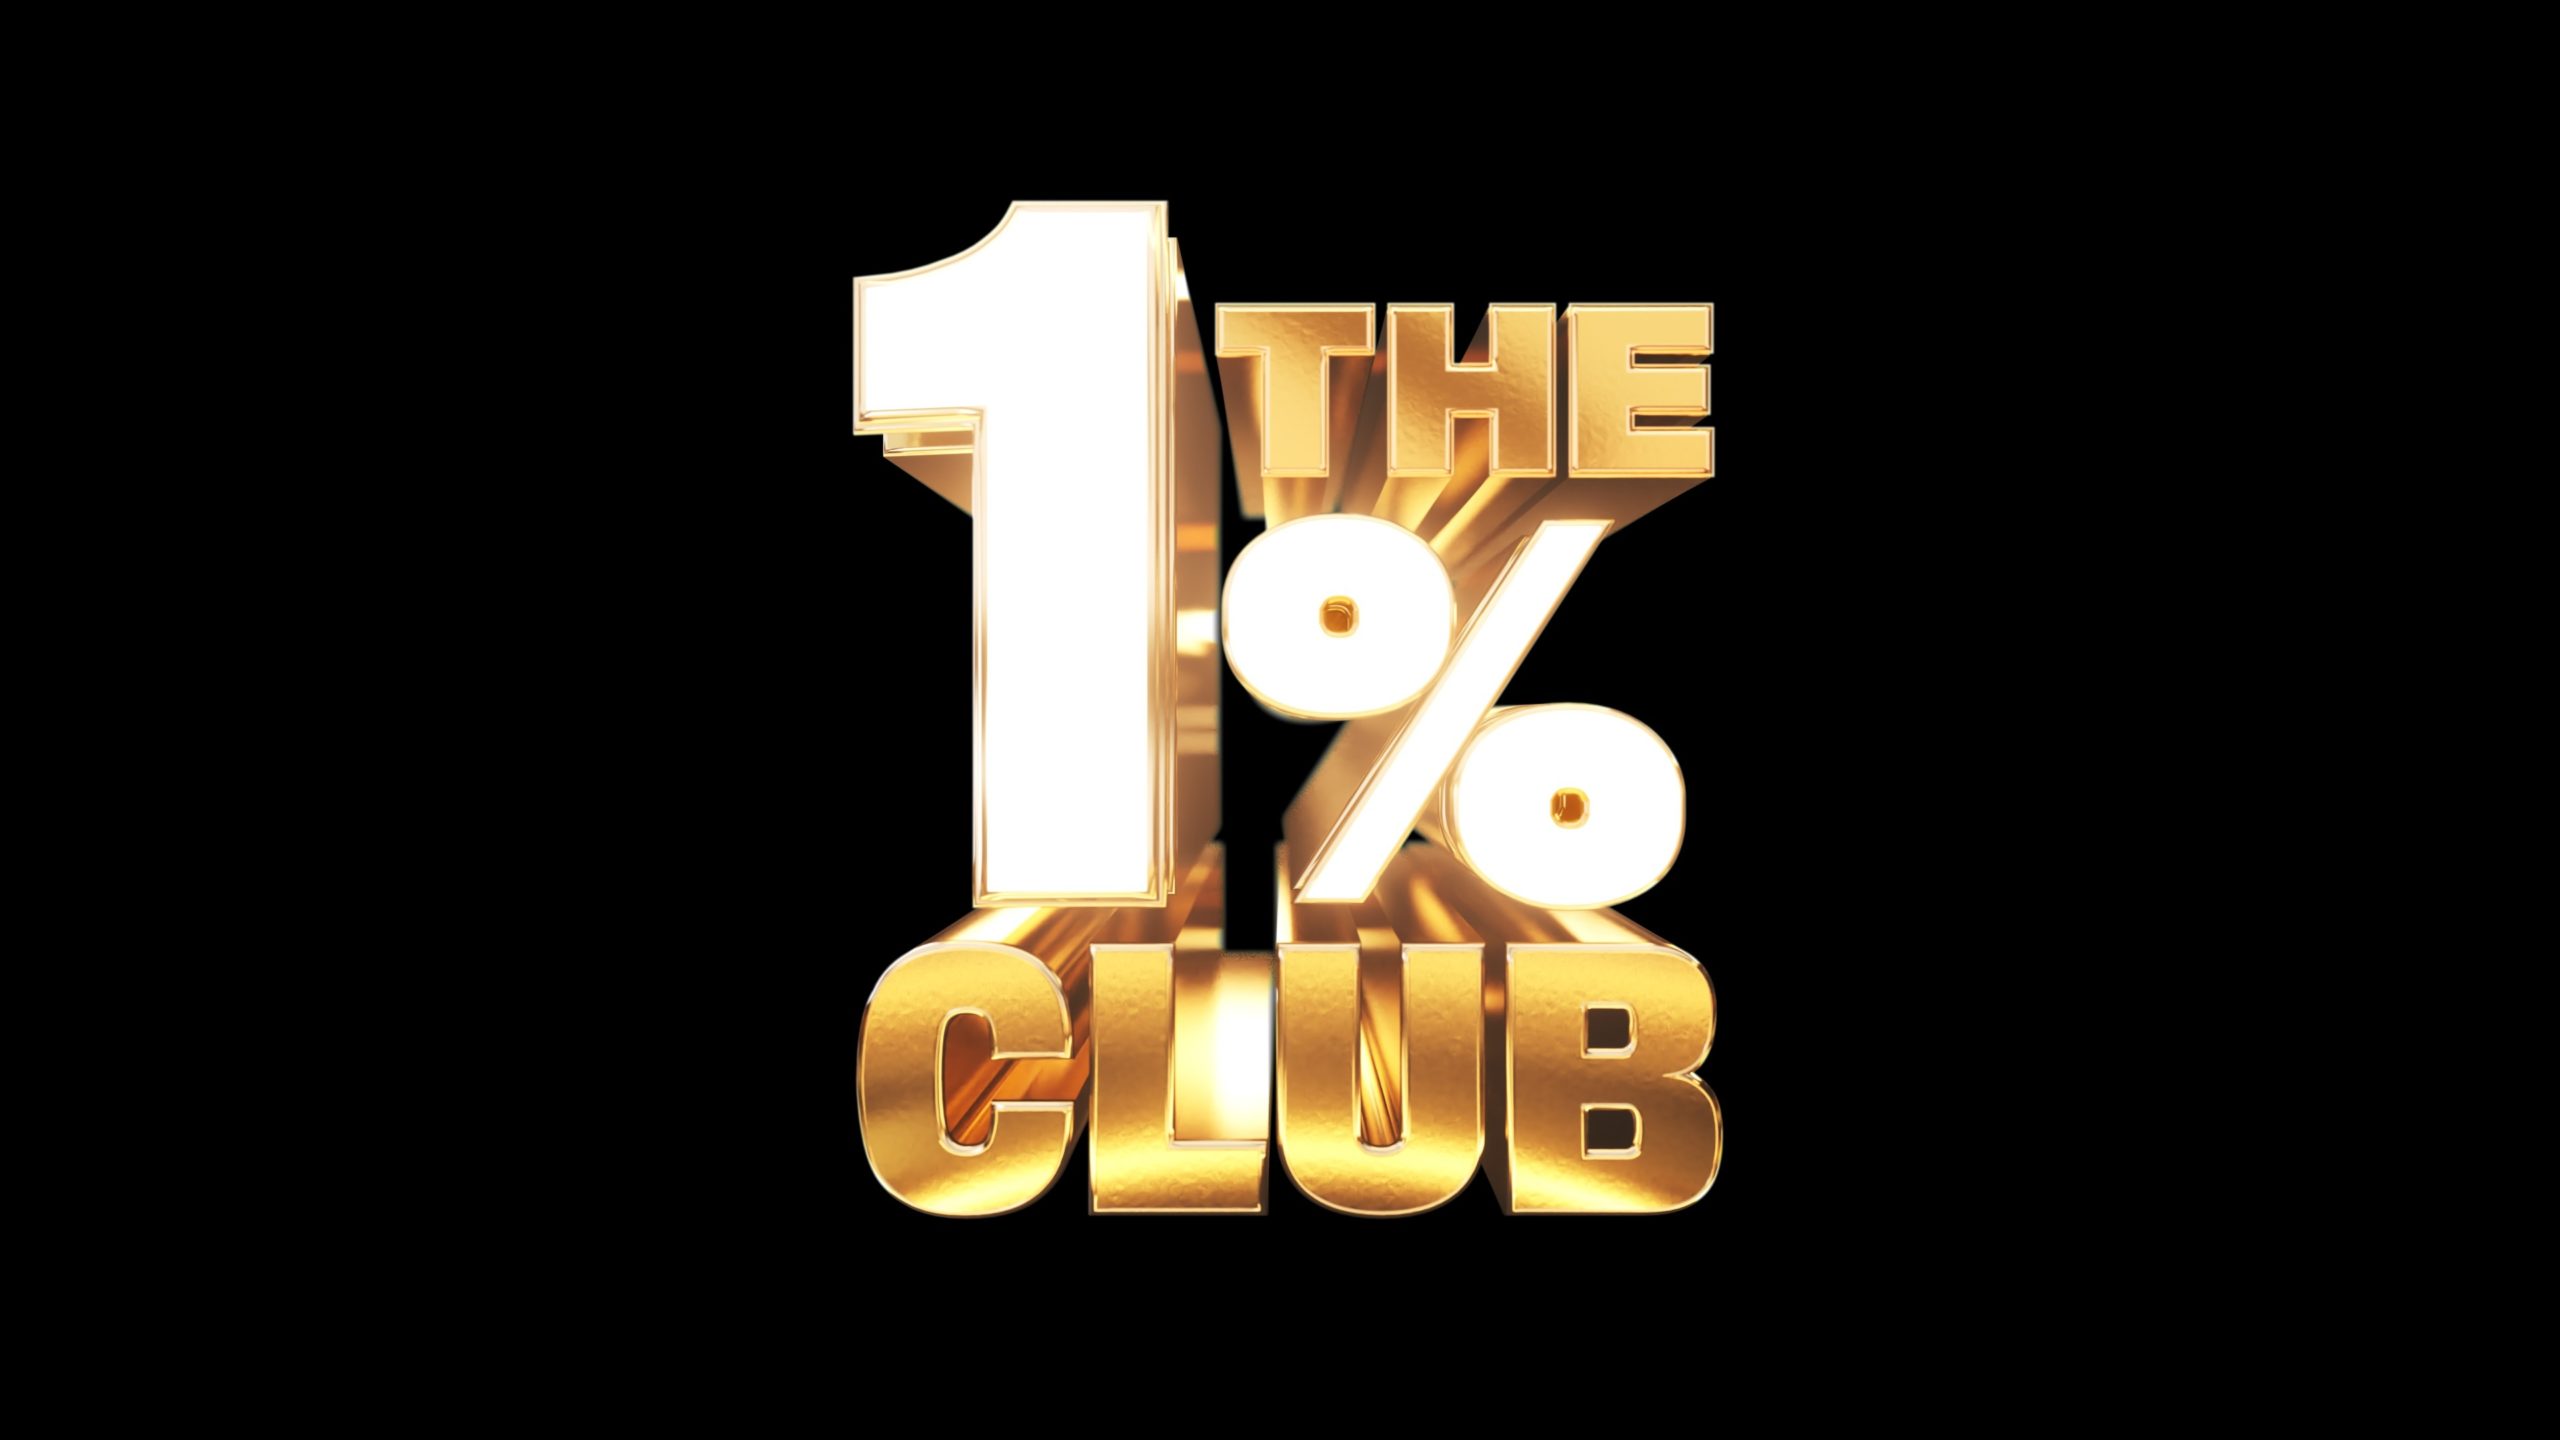 #The 1% Club: Patton Oswalt to Host FOX Game Show with Premiere Episode on Prime Video